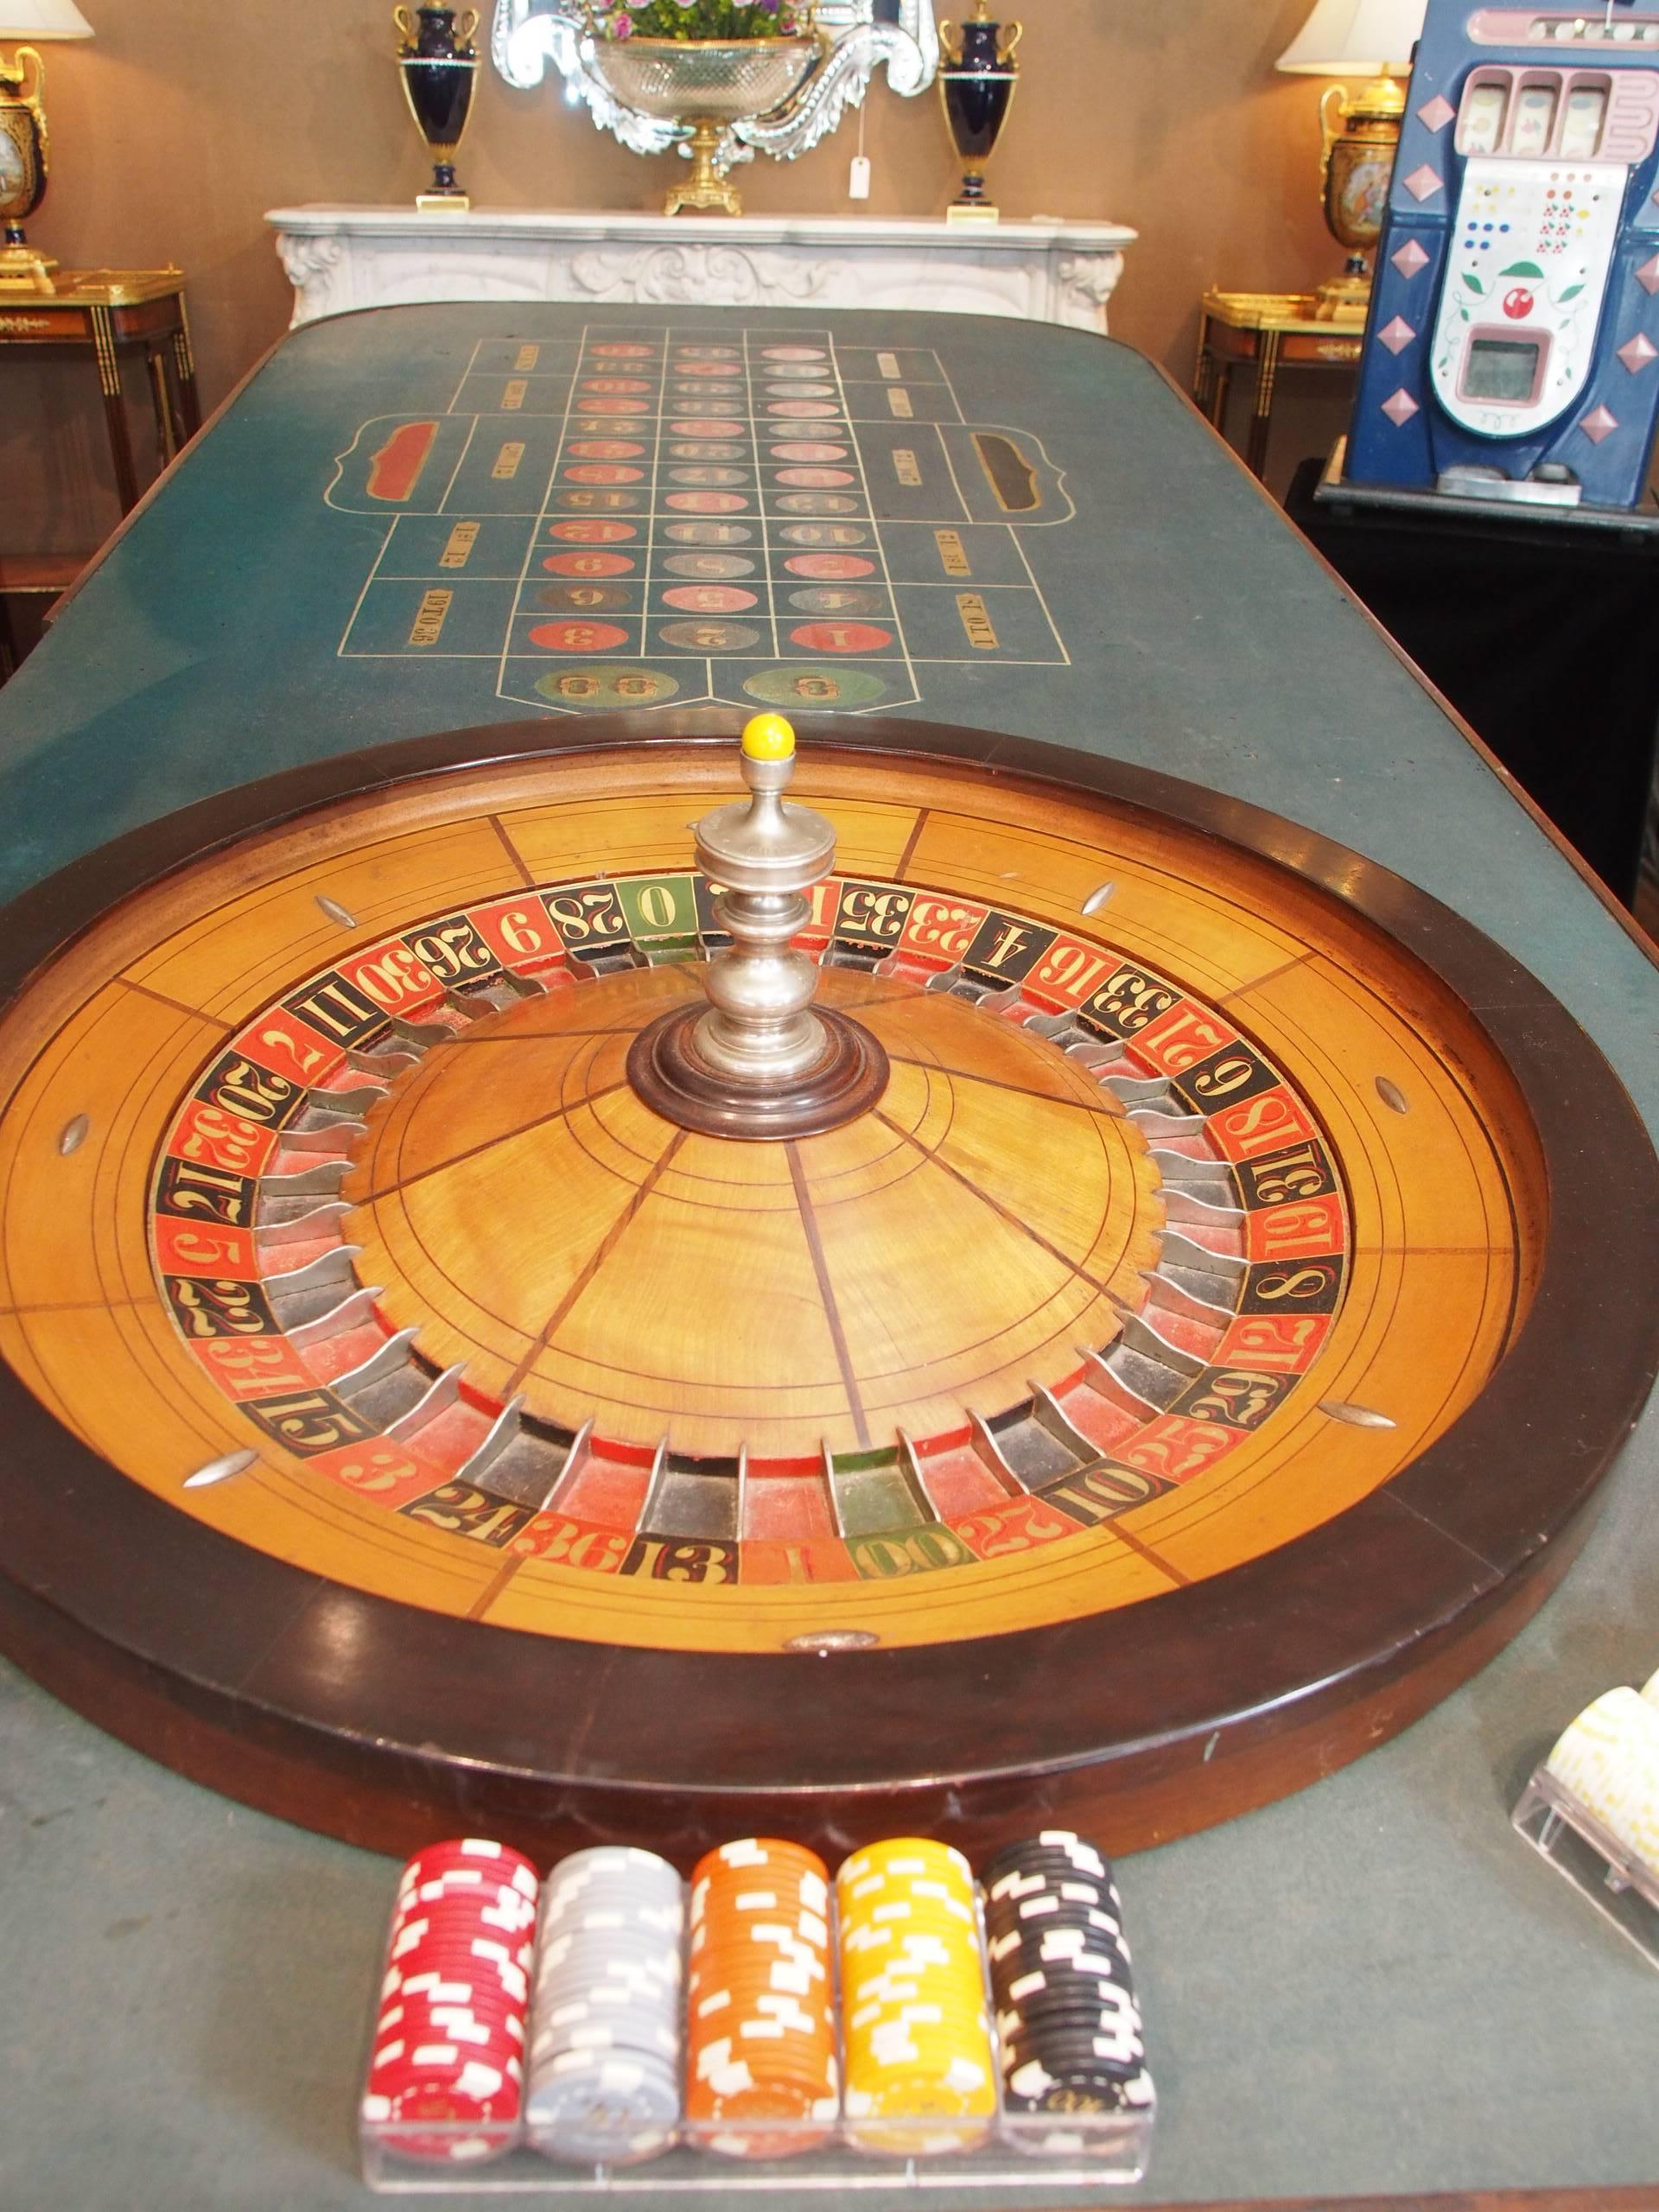 Antique American roulette table, circa 1900s from the home of a Rhode Island governor.